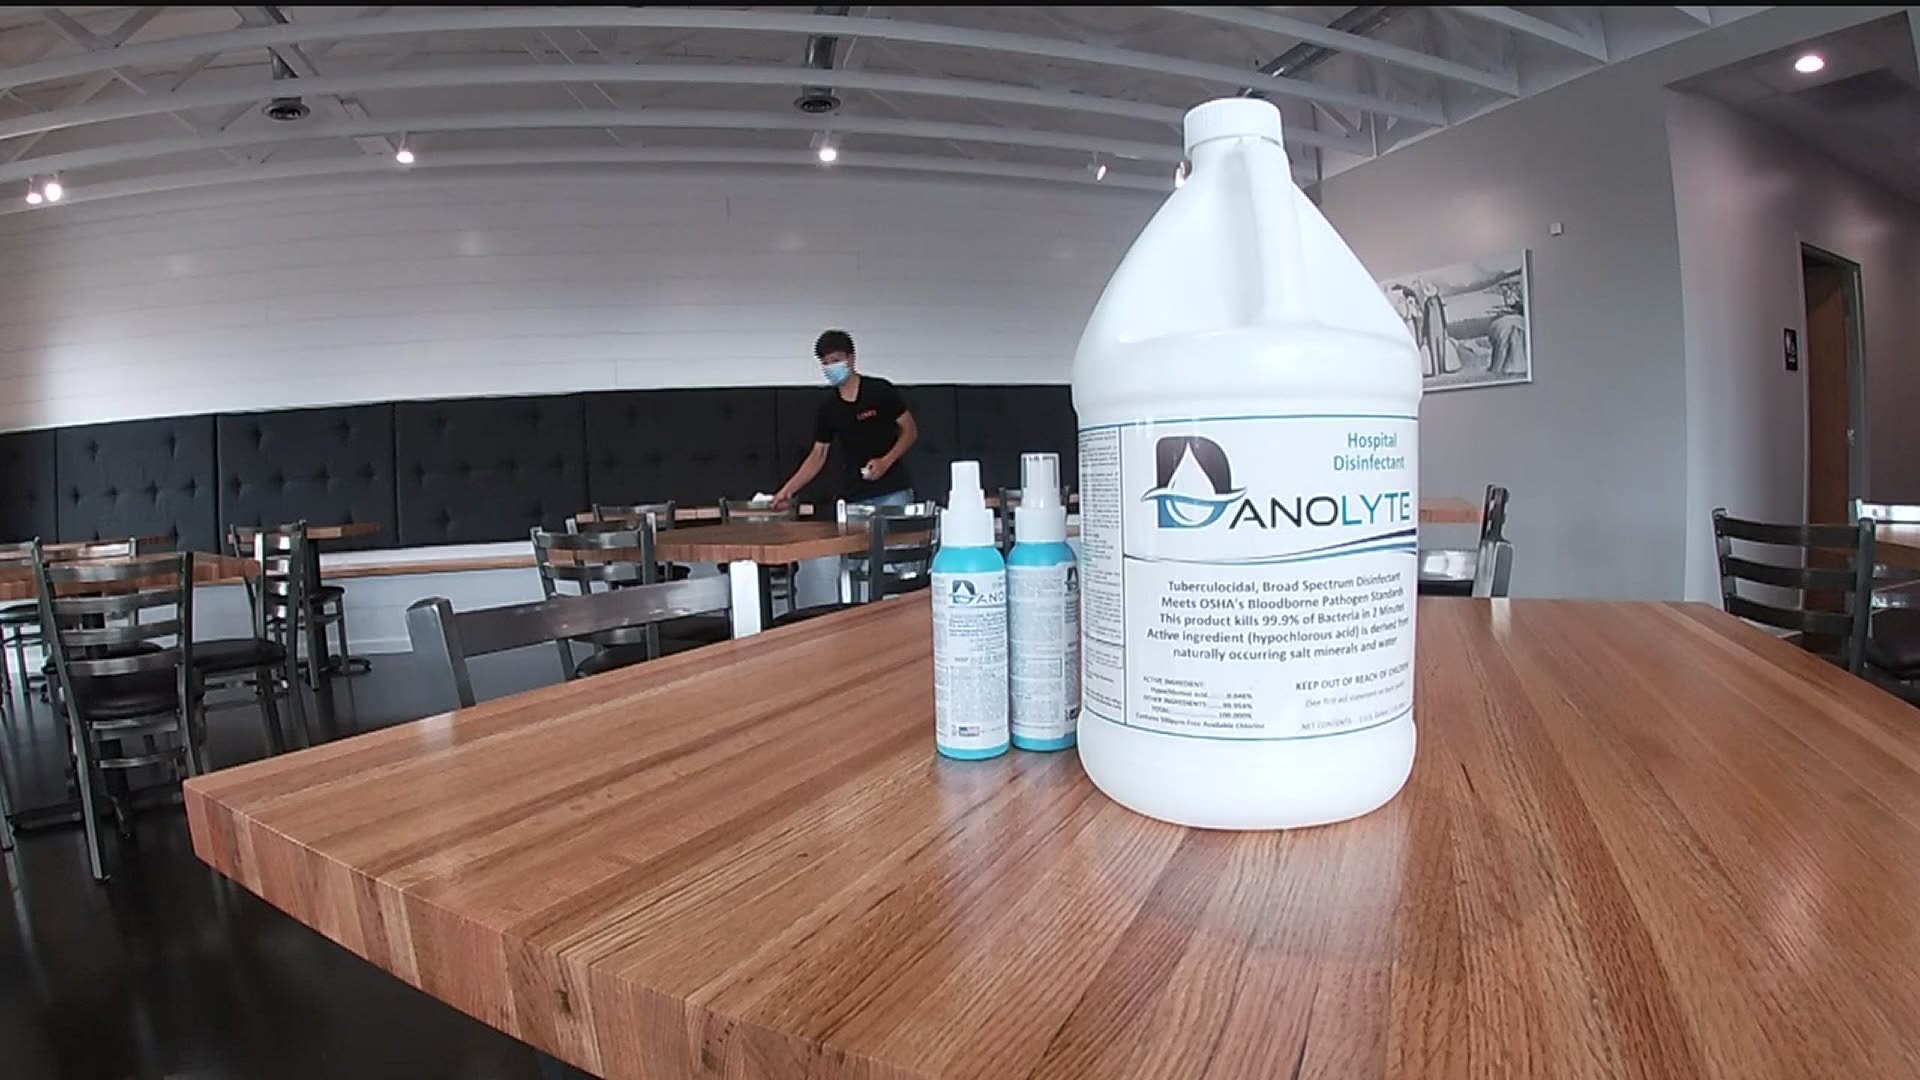 Local companies in the QC say they are using Danolyte for it's simple ingredients.